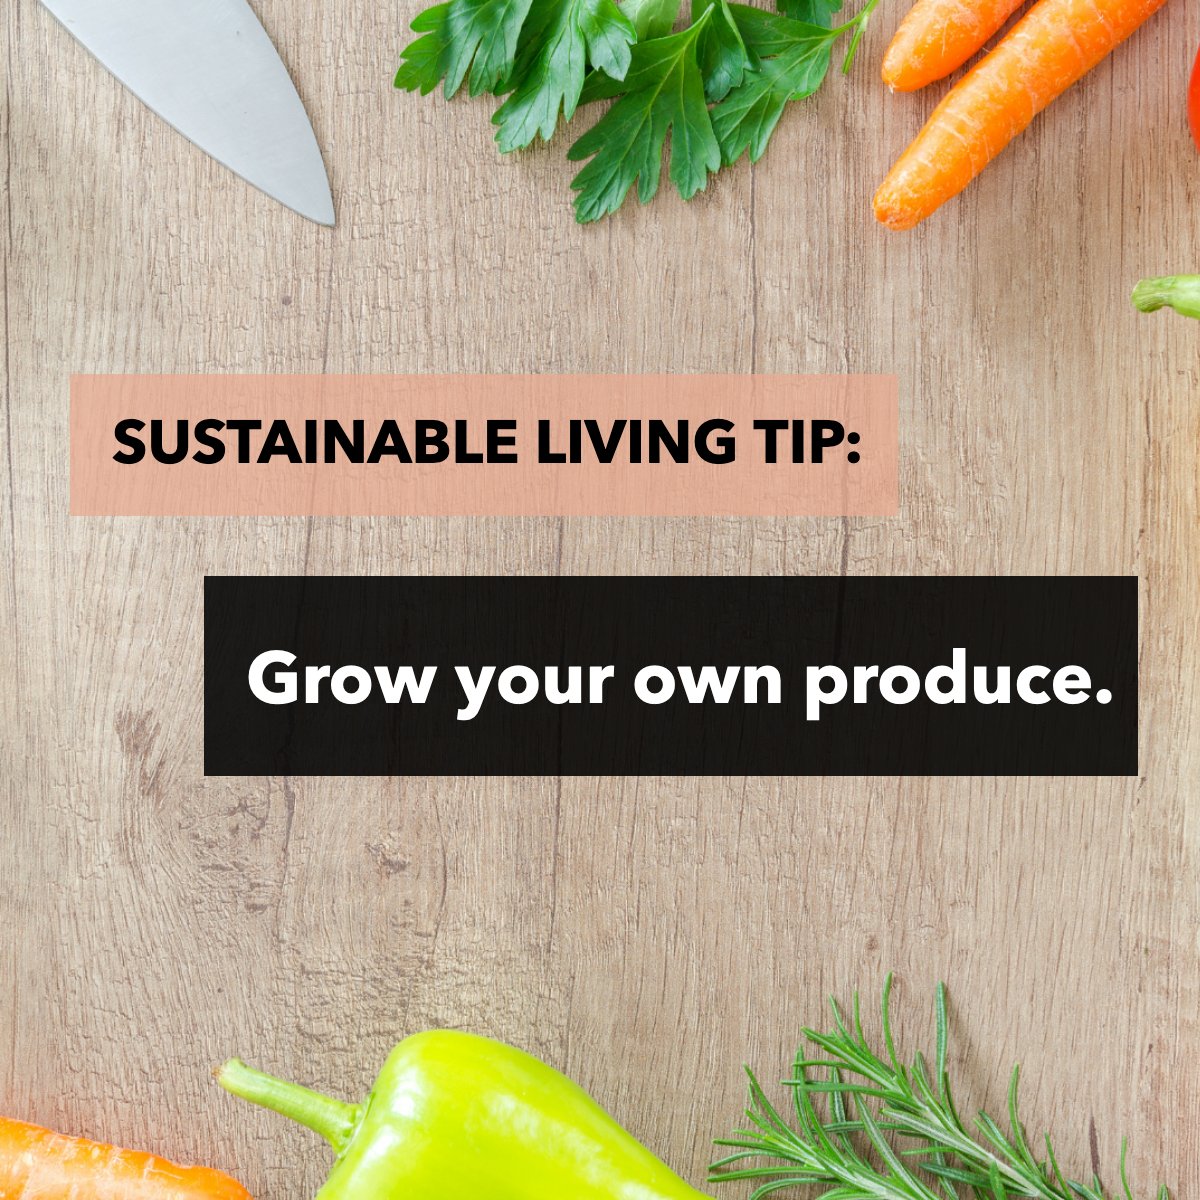 Do you cultivate some of your vegetables or food 🍅?  This is not only healthier but extremely sustainable! 

#sustainablelifestyle #sustainable #sustainablity #sustainablefood 
 #BroughtonProperties #518 #KWRI #KWRN #SaratogaNY #HudsonNY #UpstateNY